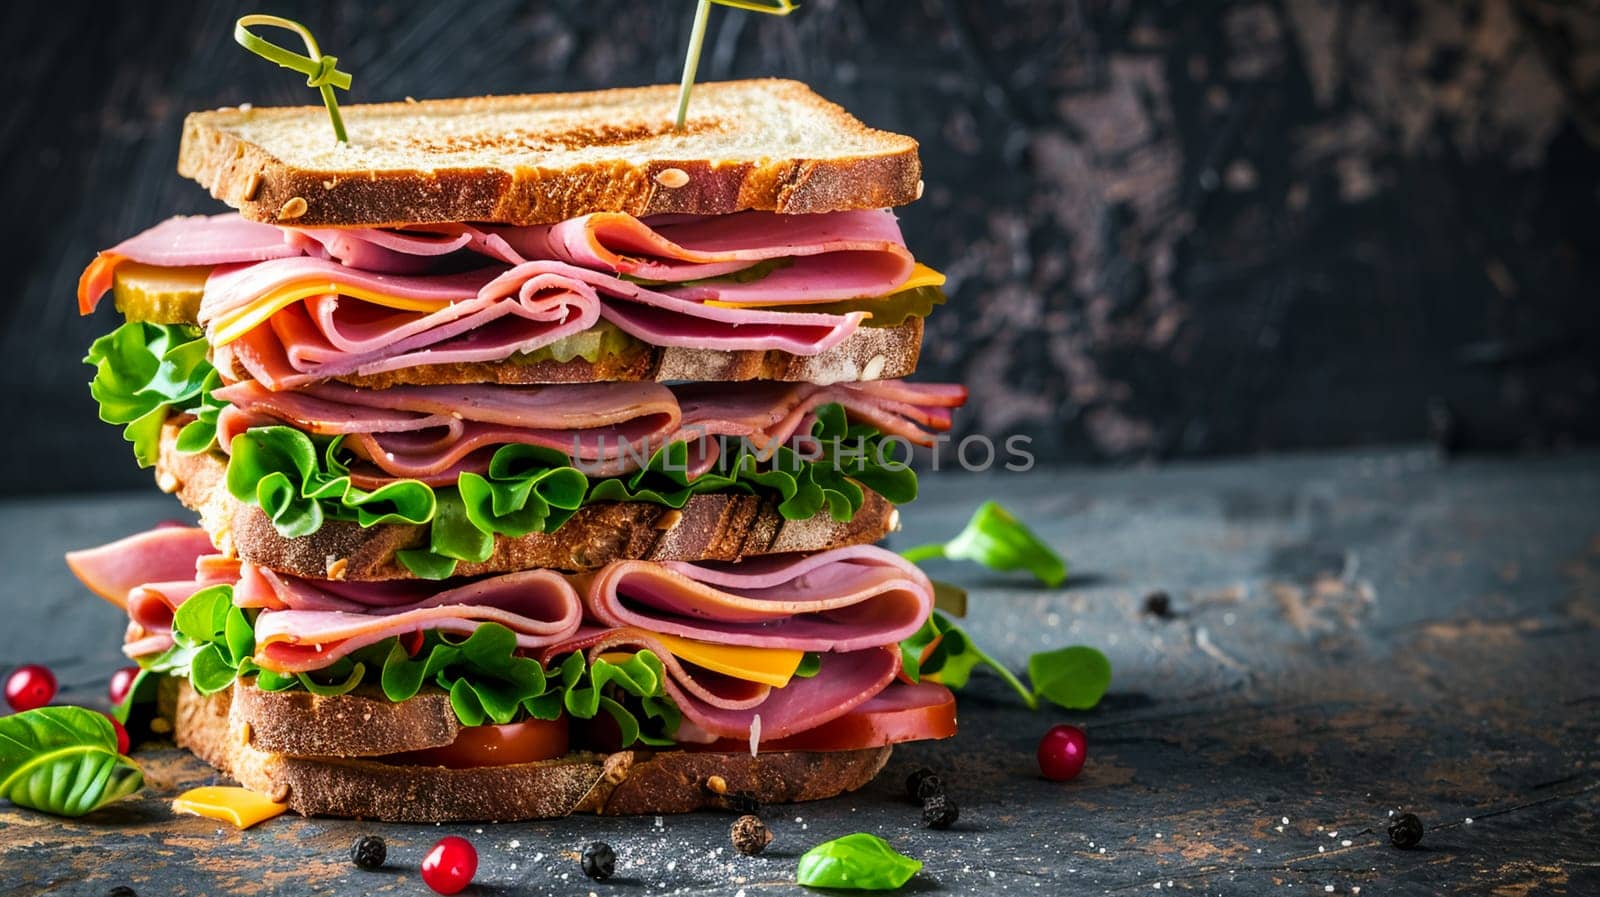 Delicious towering ham and cheese sandwich on rustic dark background, ready to enjoy